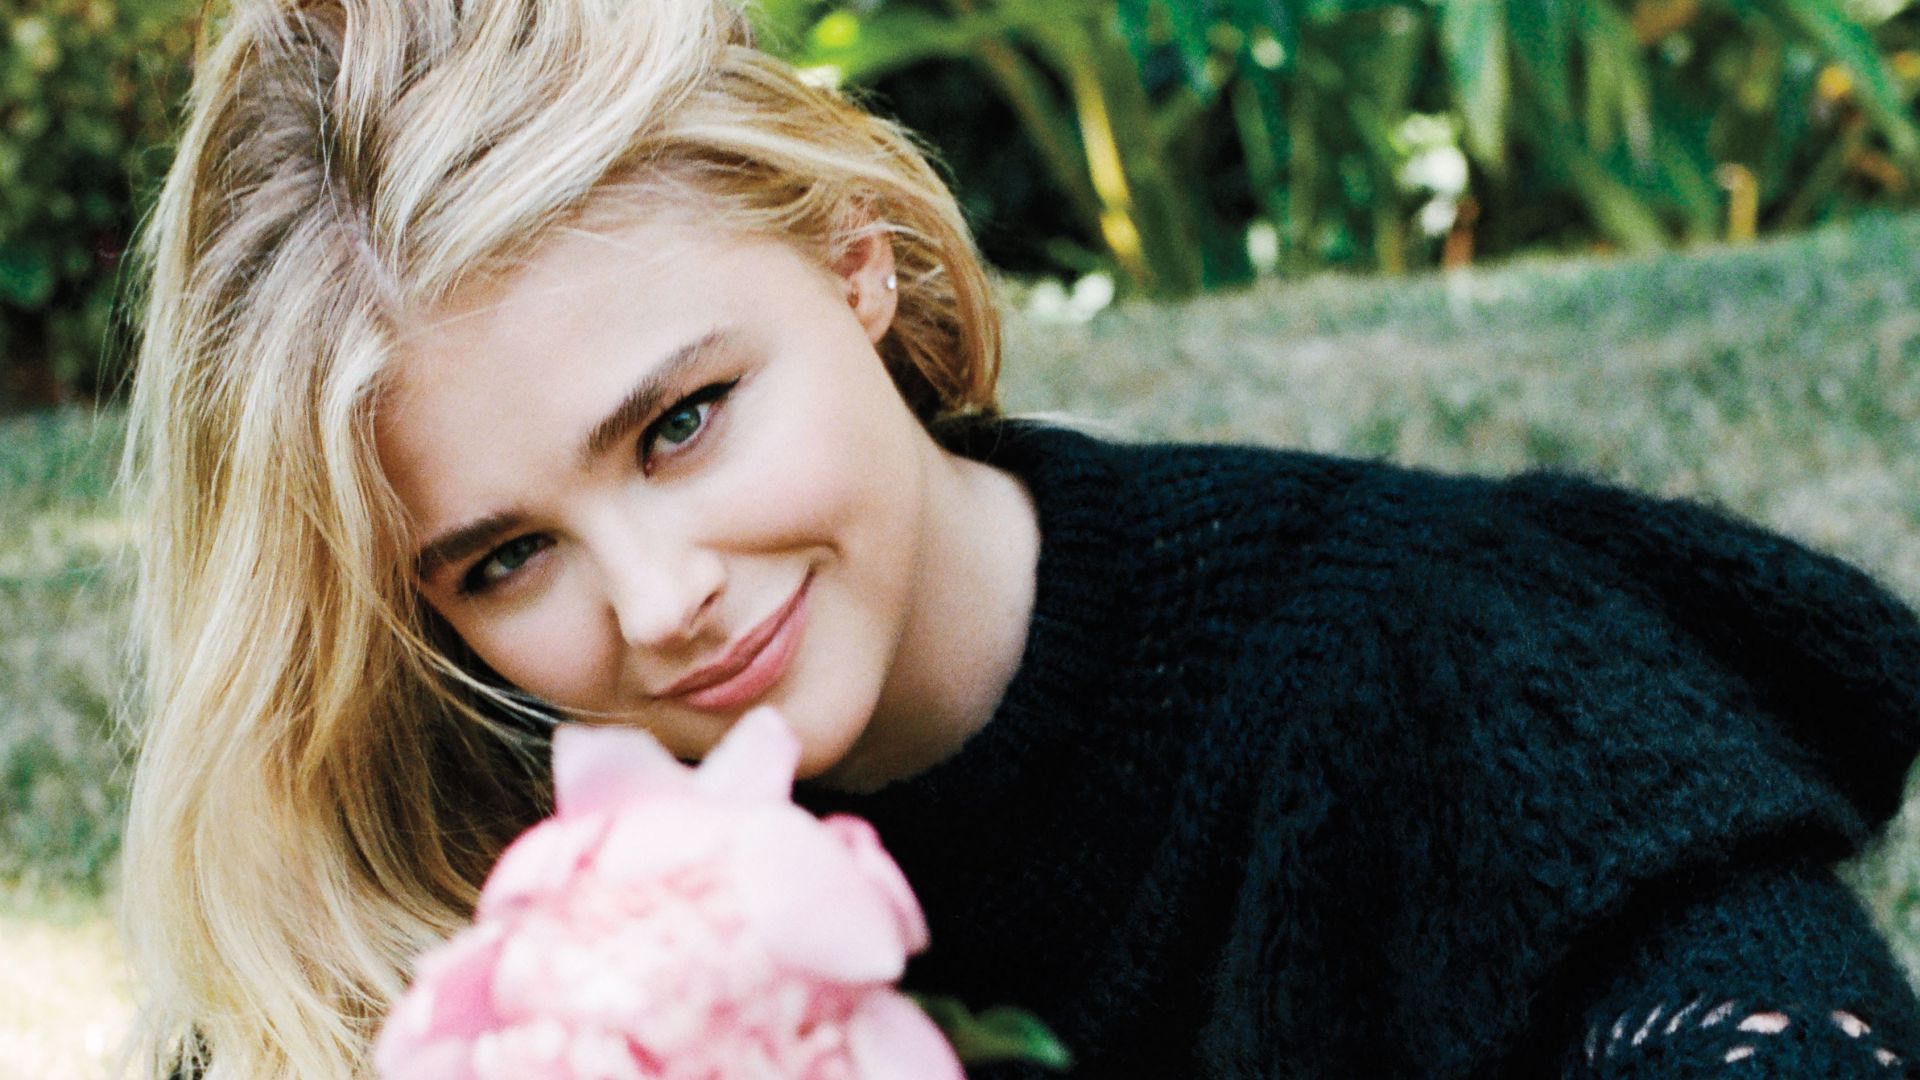 The Beautiful Chloë Grace Moretz 💖∞ There's that smile I needed